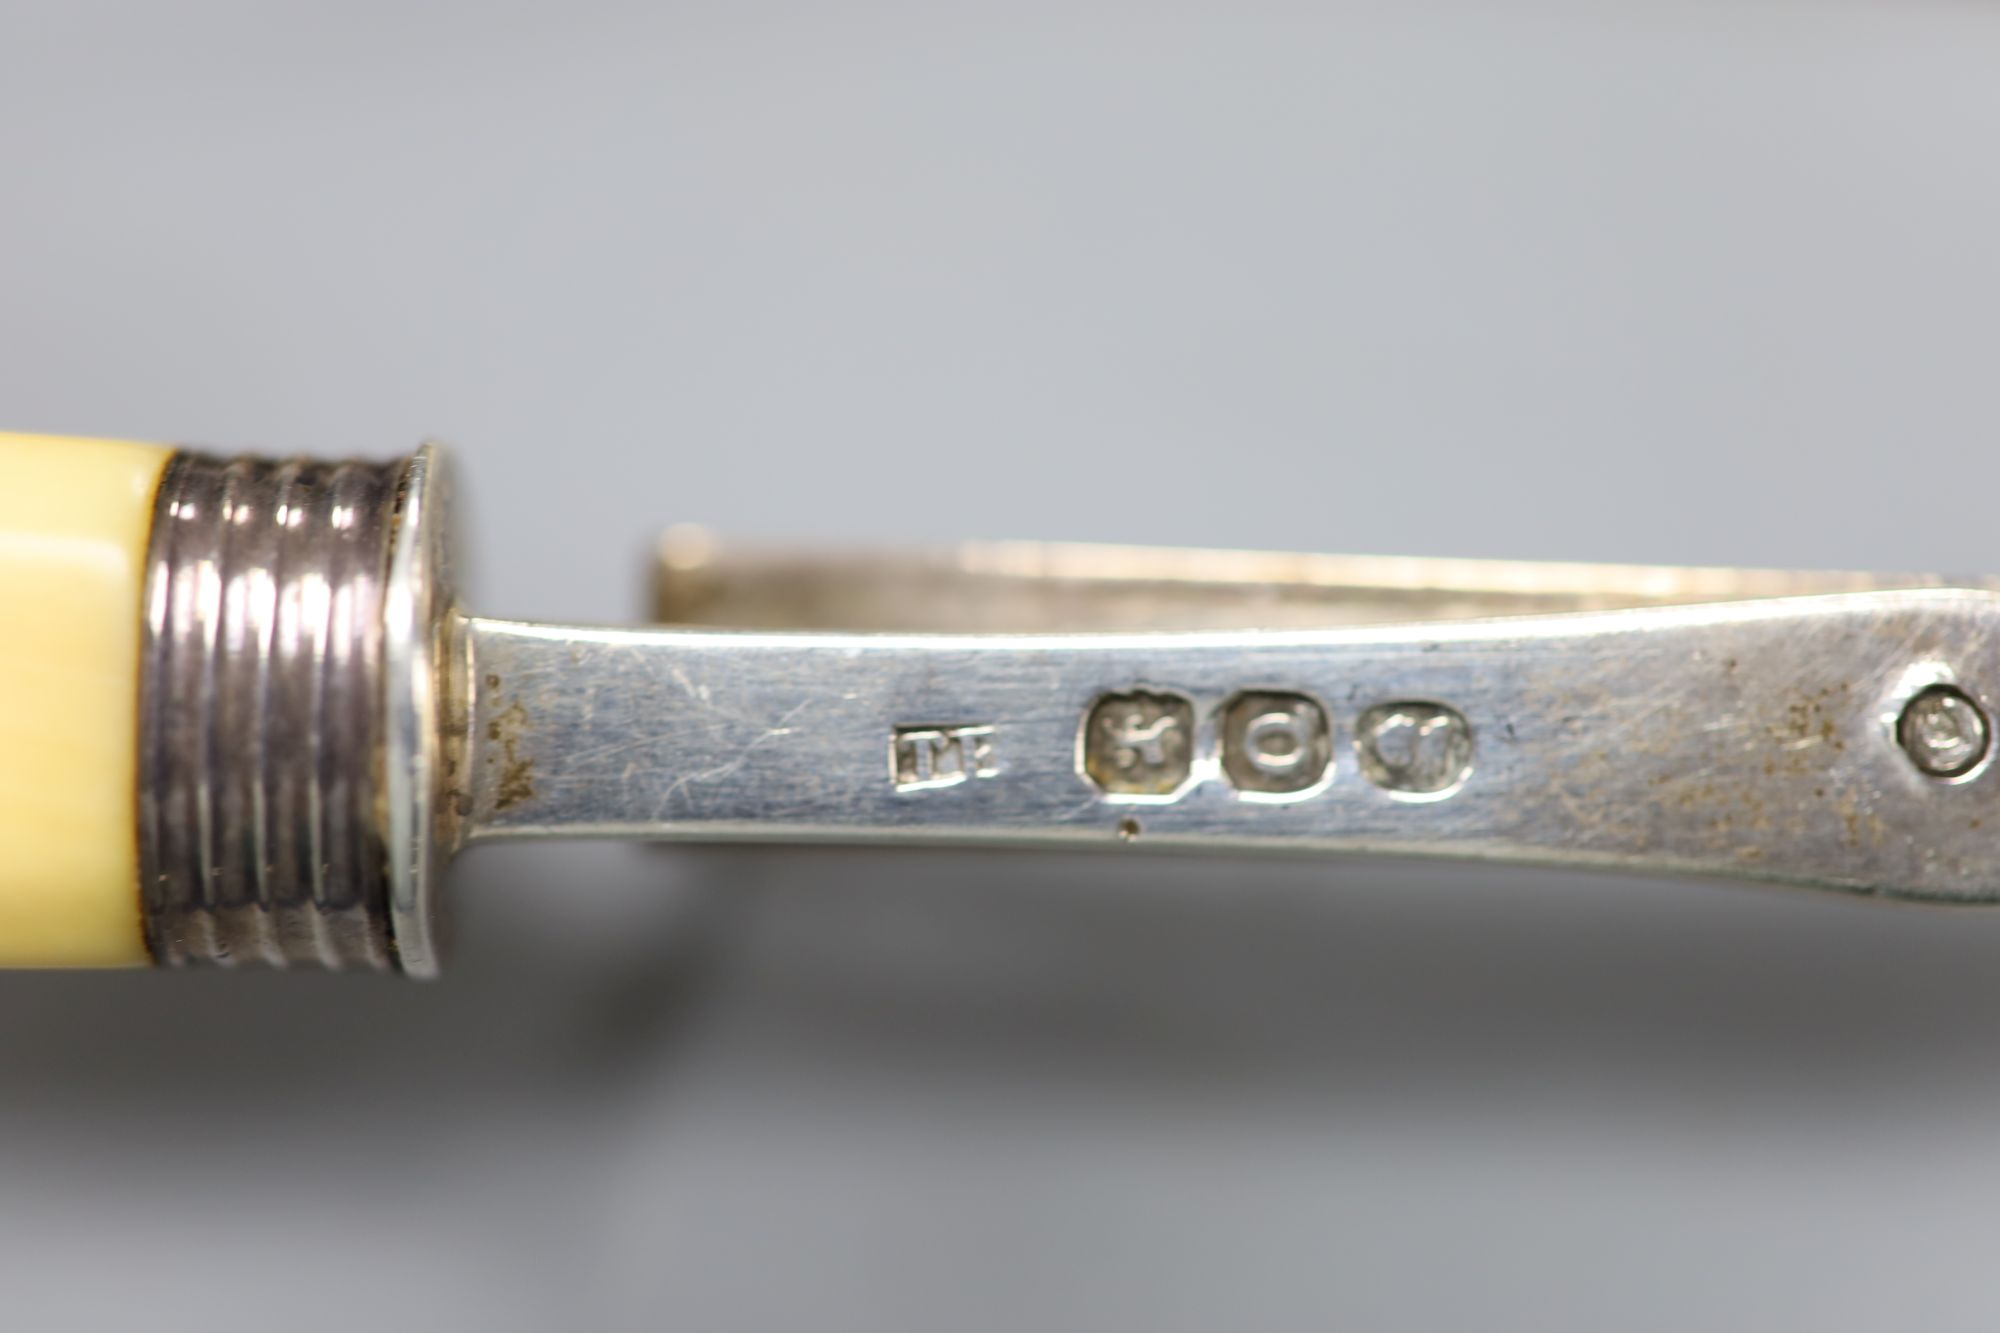 A George III ivory-handled silver cheese scoop, London, 1811, 26.4cm, a silver-handled ivory page turner and a modern silver snuffer